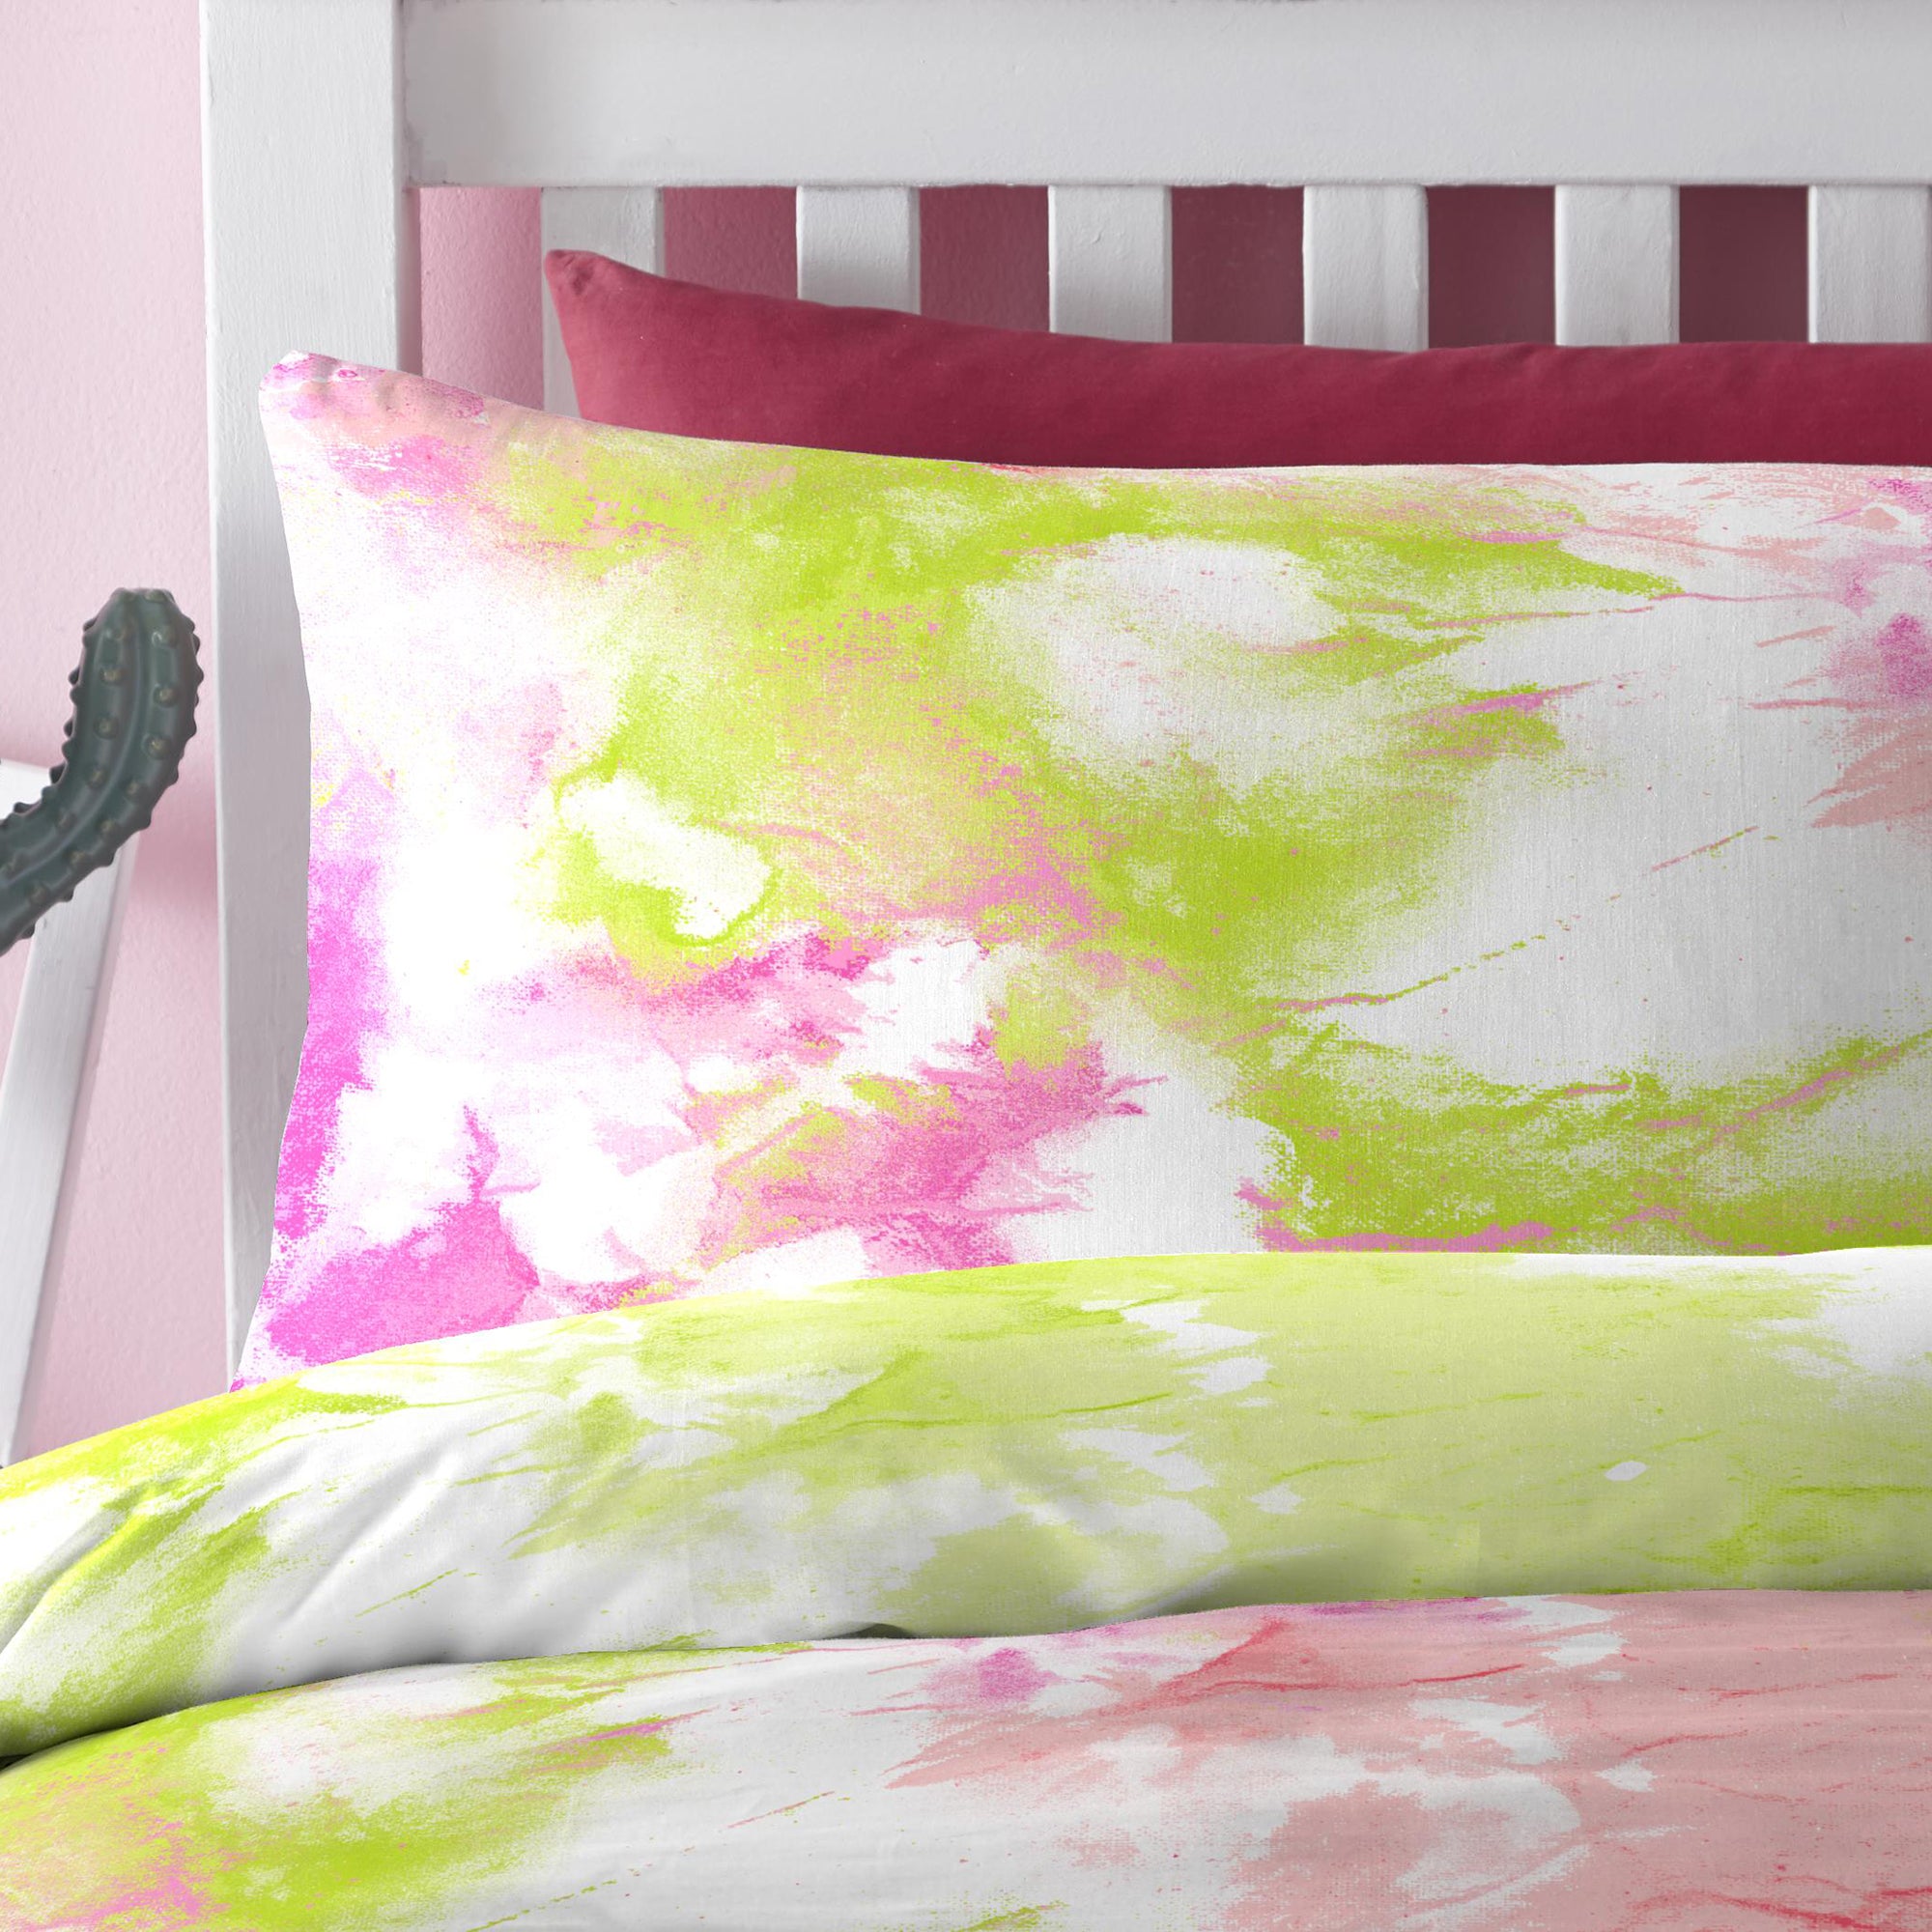 Tie Dye - Easy Care Duvet Cover Set, Curtains & Fitted Sheets in Neon Pink - by Bedlam